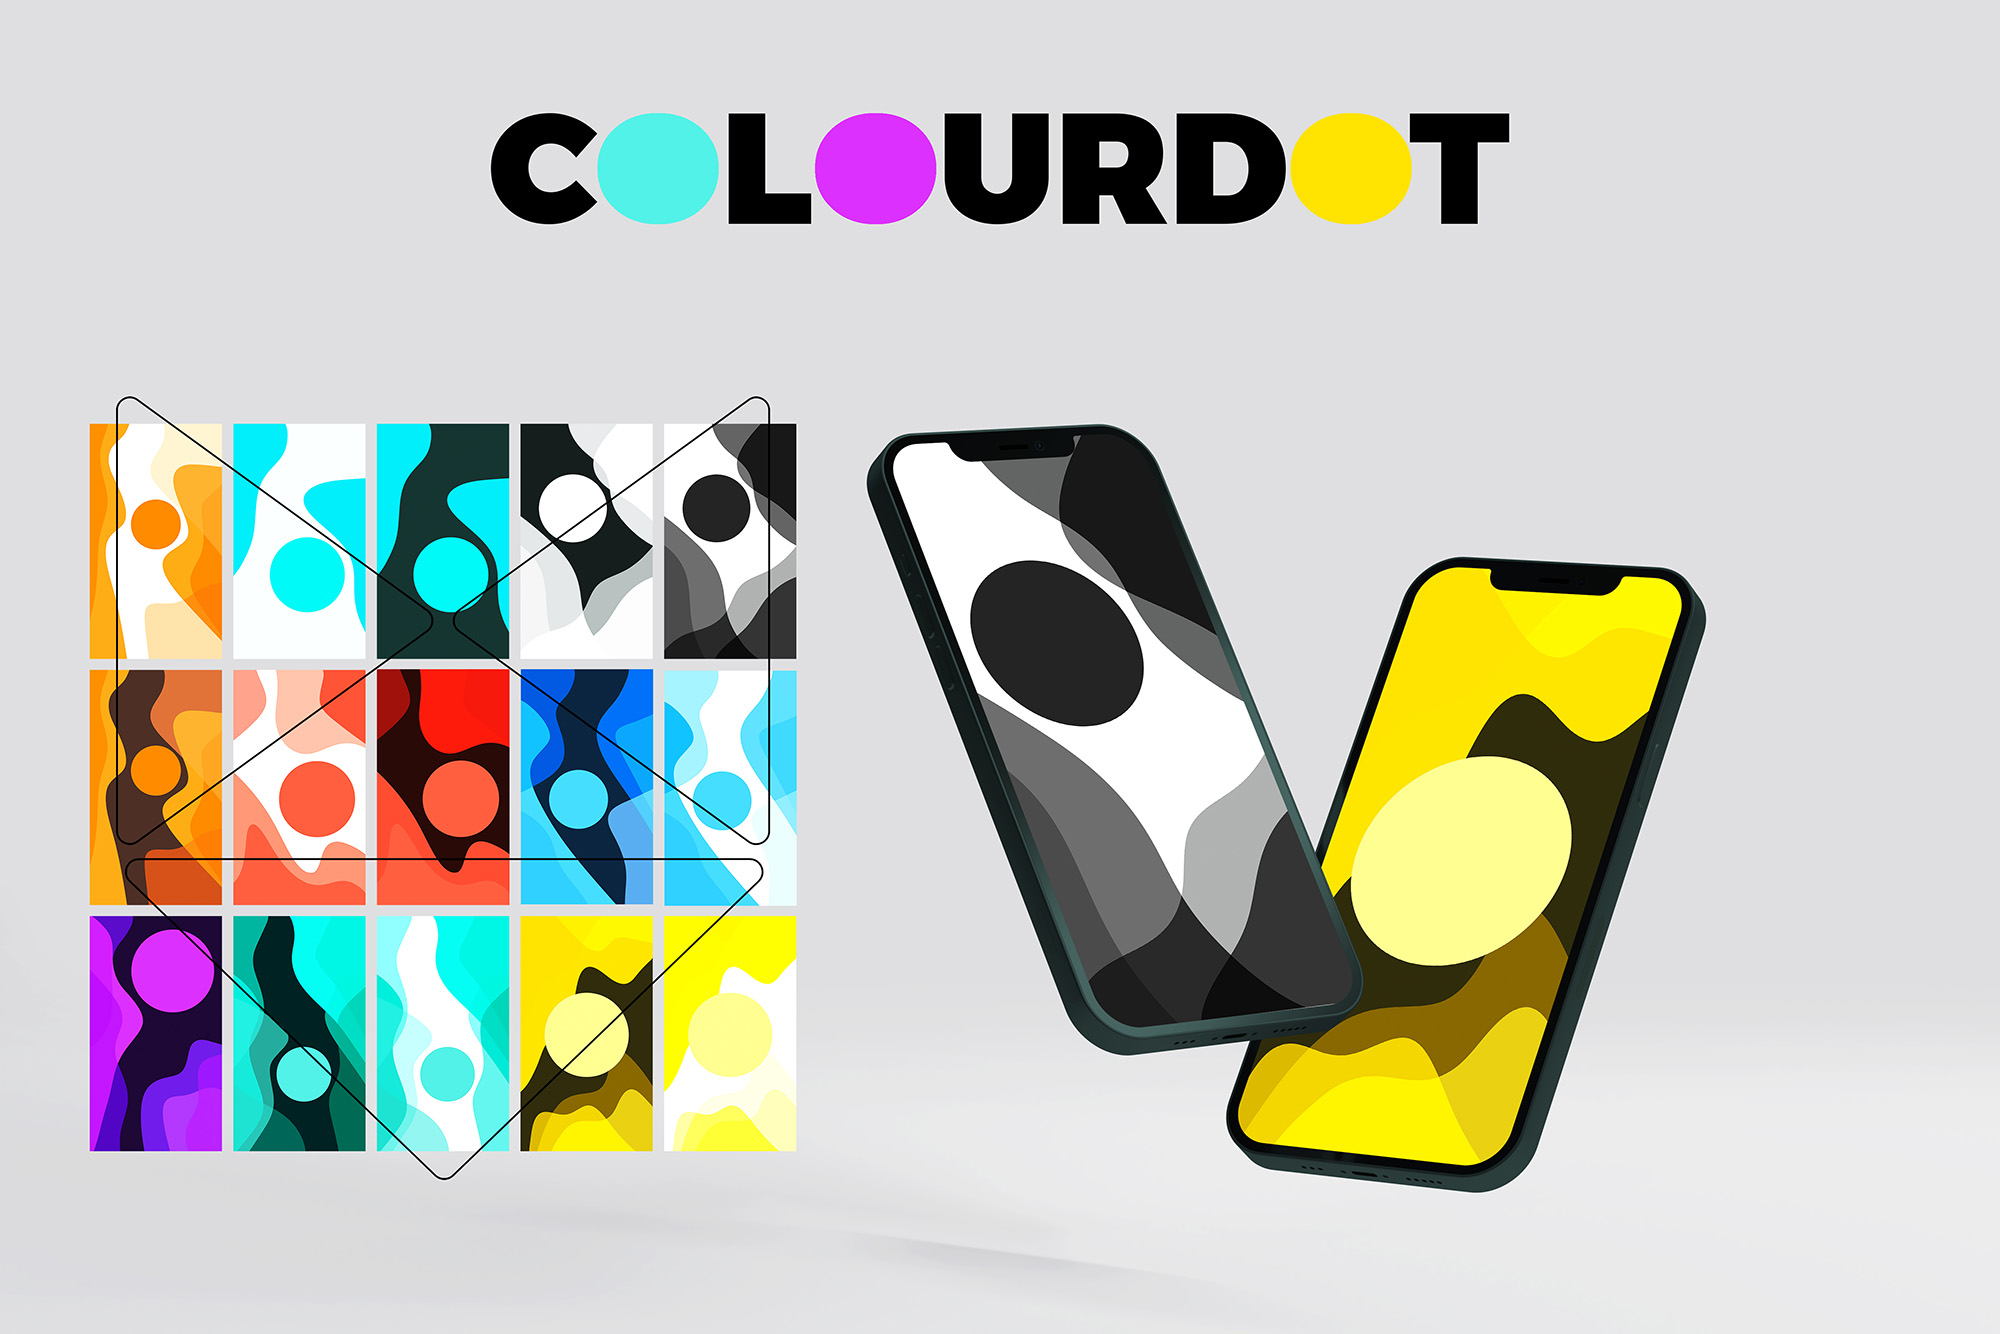 Colourdot material wallpapers